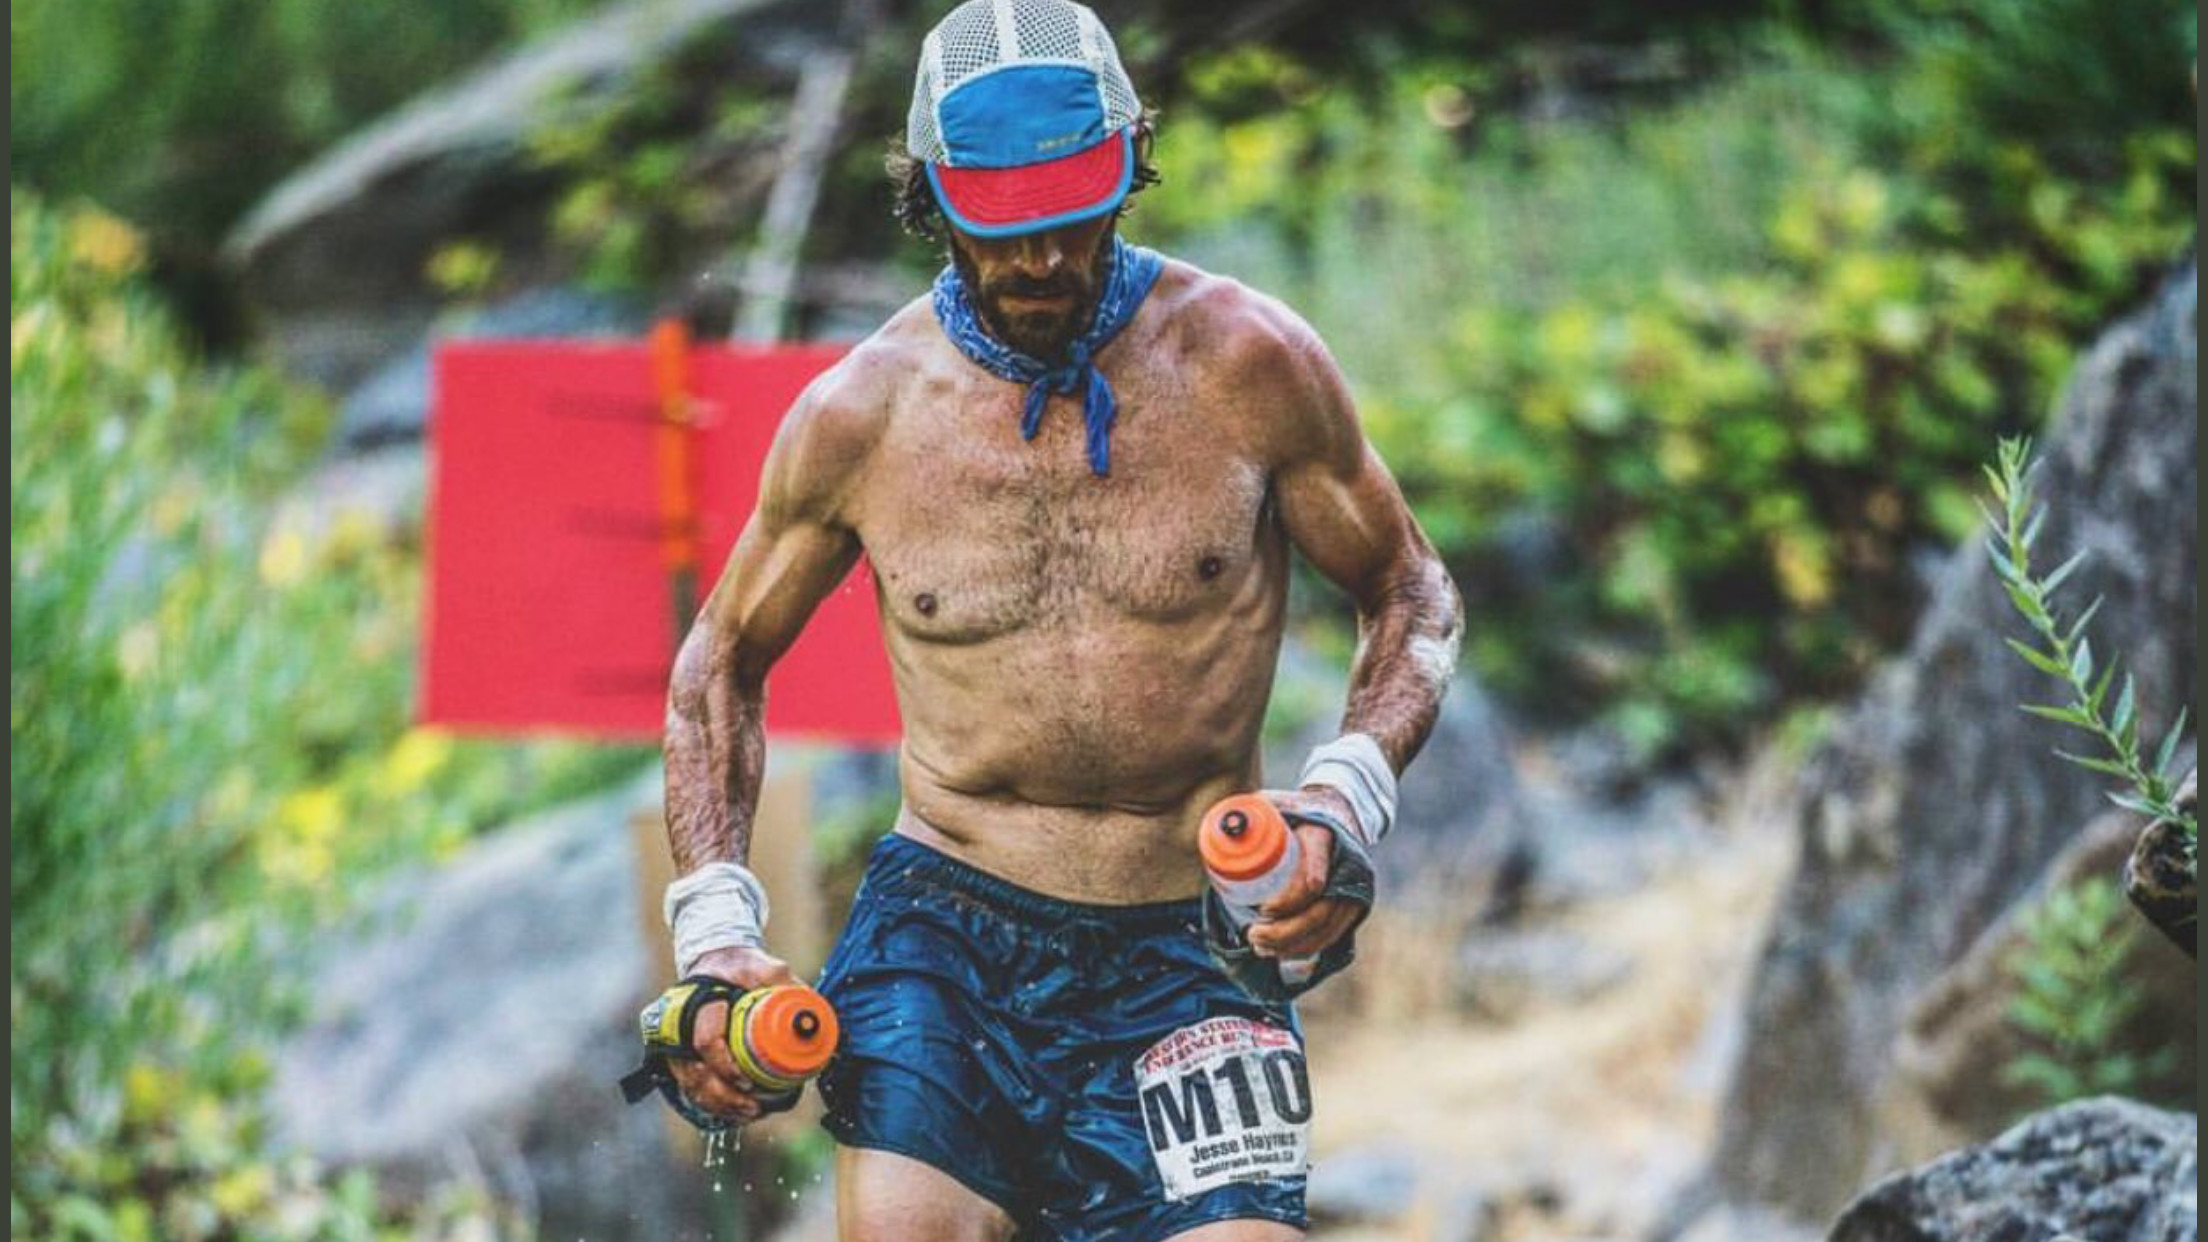 Ultra Running Picture Of the Year 2017